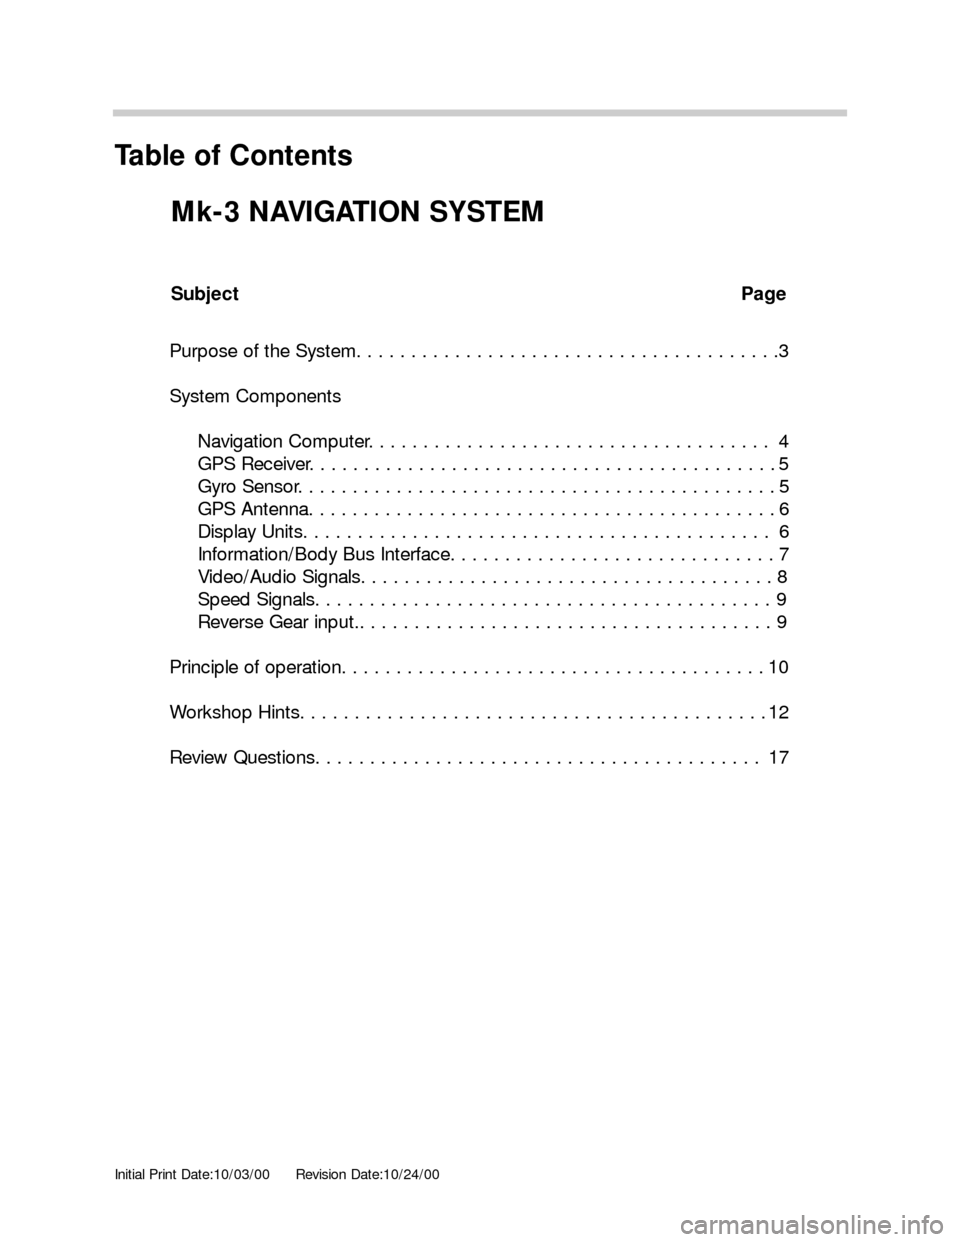 BMW X5 2004 E53 Mk3 Navigation System Manual Initial Print Date:10/03/00Revision Date:10/24/00
Subject Page
Purpose of the System. . . . . . . . . . . . . . . . . . . . . . . . . . . . . . . . . . . . . . .3
System Components
Navigation Computer